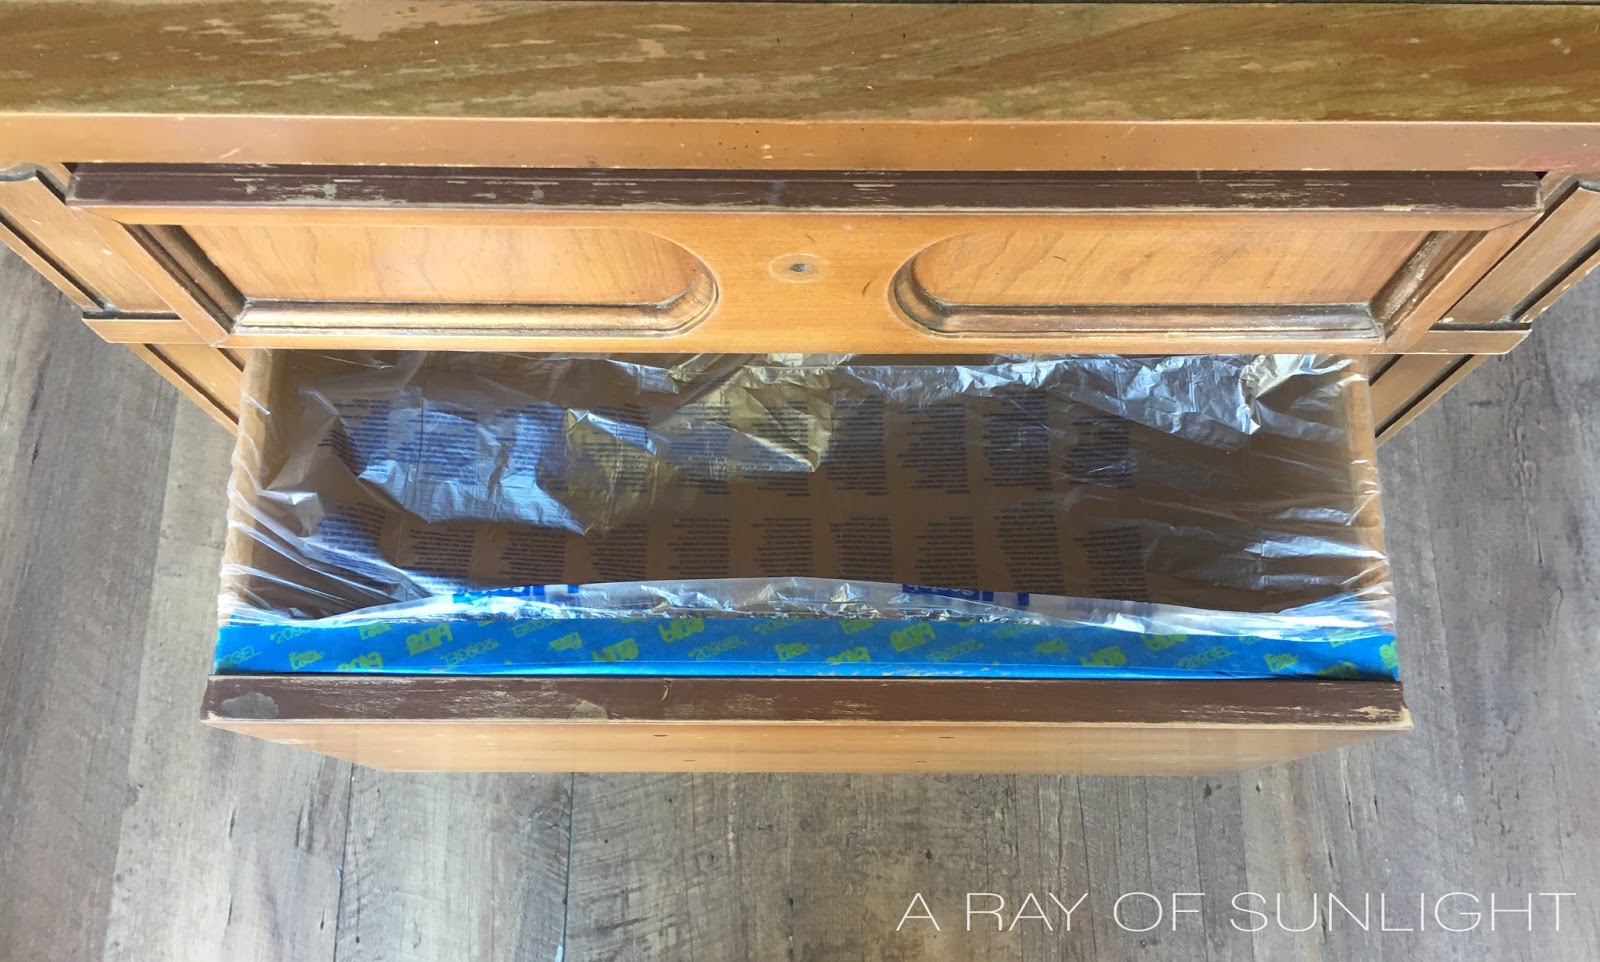 How to prep furniture for paint by taping off your furniture for a paint sprayer. This is the best way to spray your furniture without getting overspray inside the drawers and cabinet spaces. How to Use a Paint Sprayer on Furniture by A Ray of Sunlight